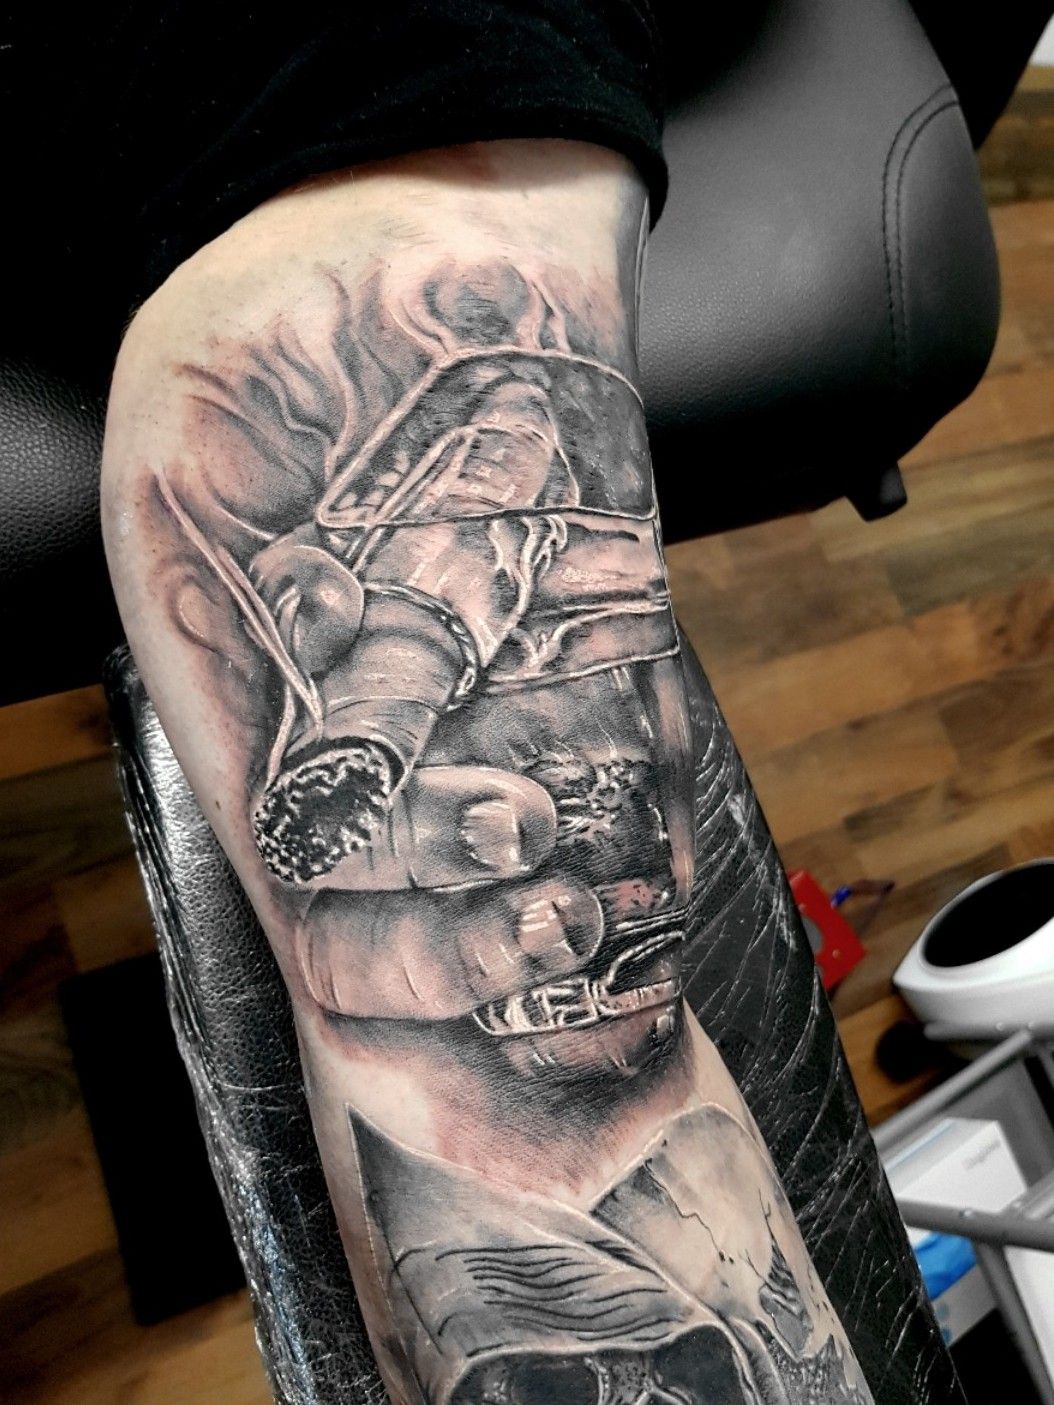 Motorink Finest Tattooing  Cool whiskey glass by israelcelli  Thanks  Eva  You have a nice idea for a tattoo Please drop by the shop or send a  message by DM